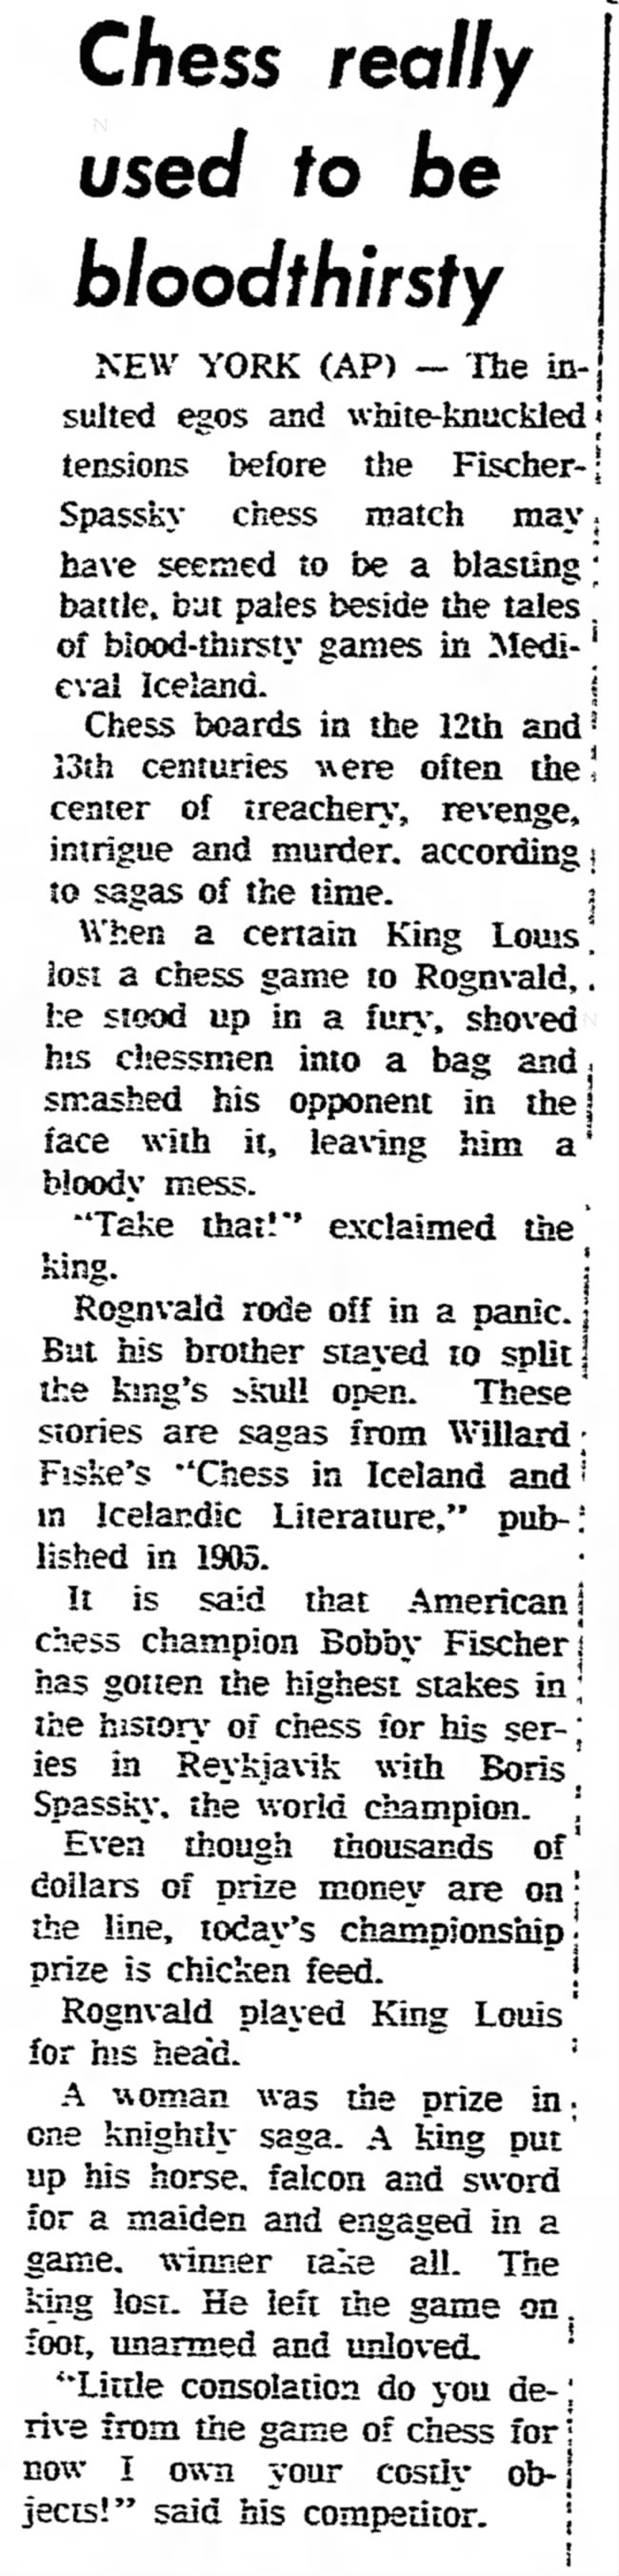 Chess Really Used to be Bloodthirsty